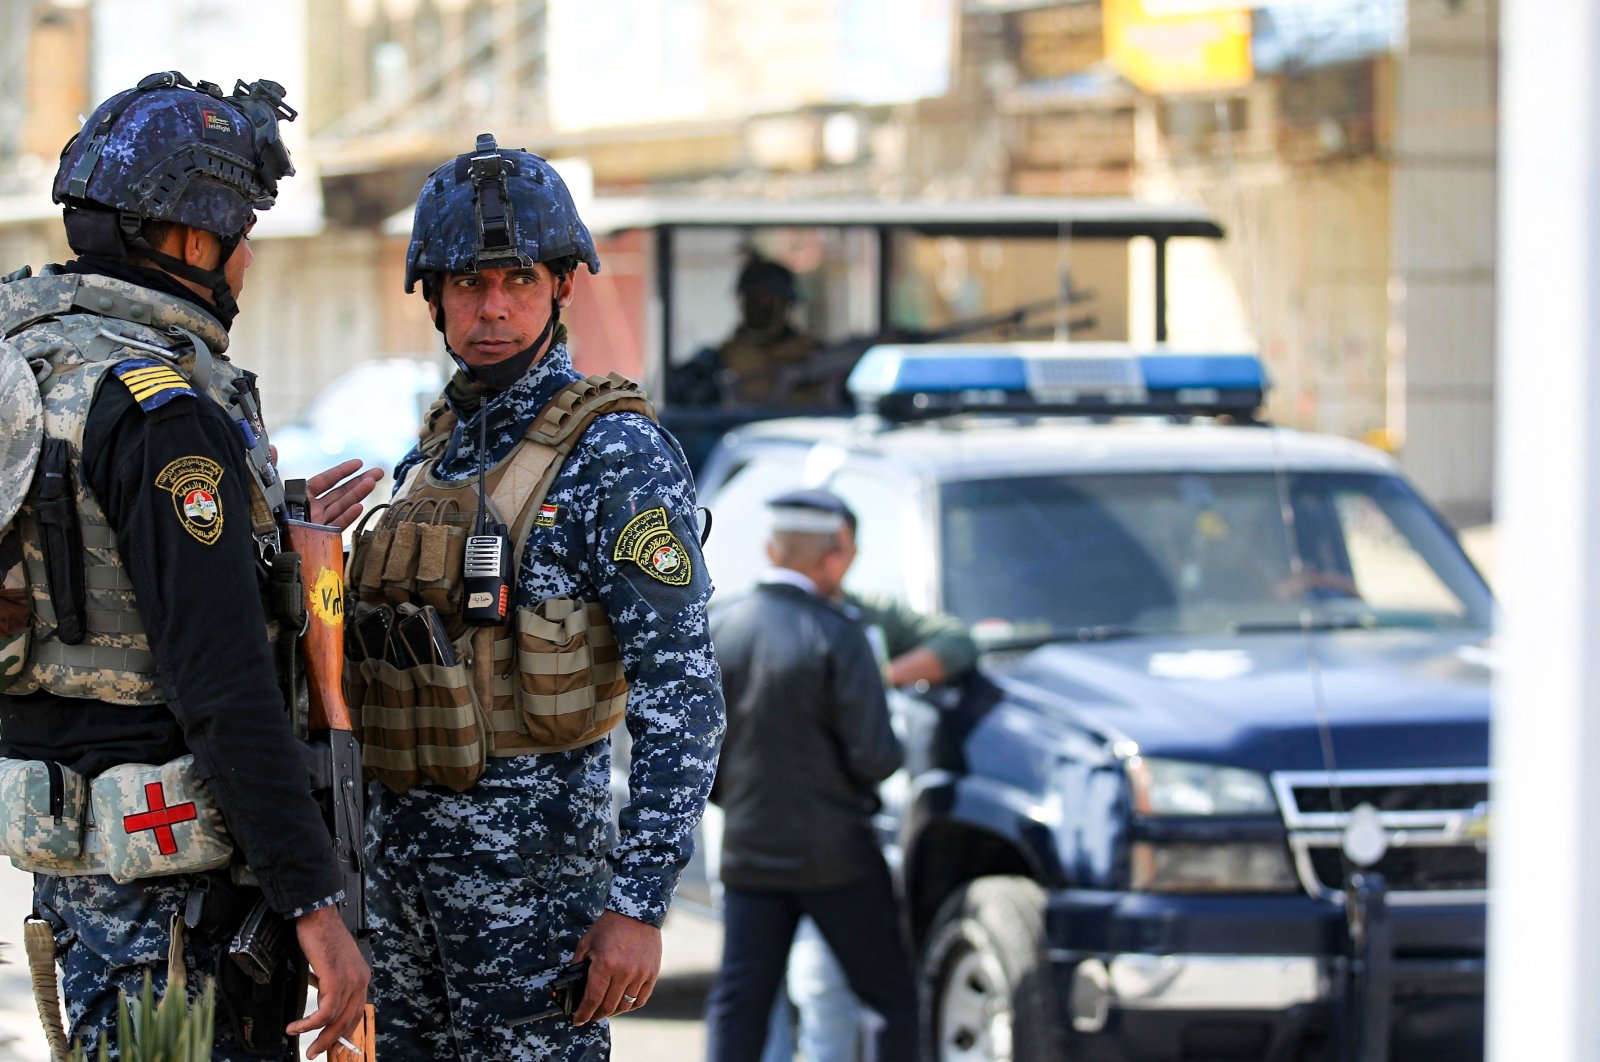 Members of the Iraqi federal police force stand guard at a checkpoint in a street in the capital during tightened security measures, Baghdad, Iraq, Jan. 29, 2021. (AFP File Photo)